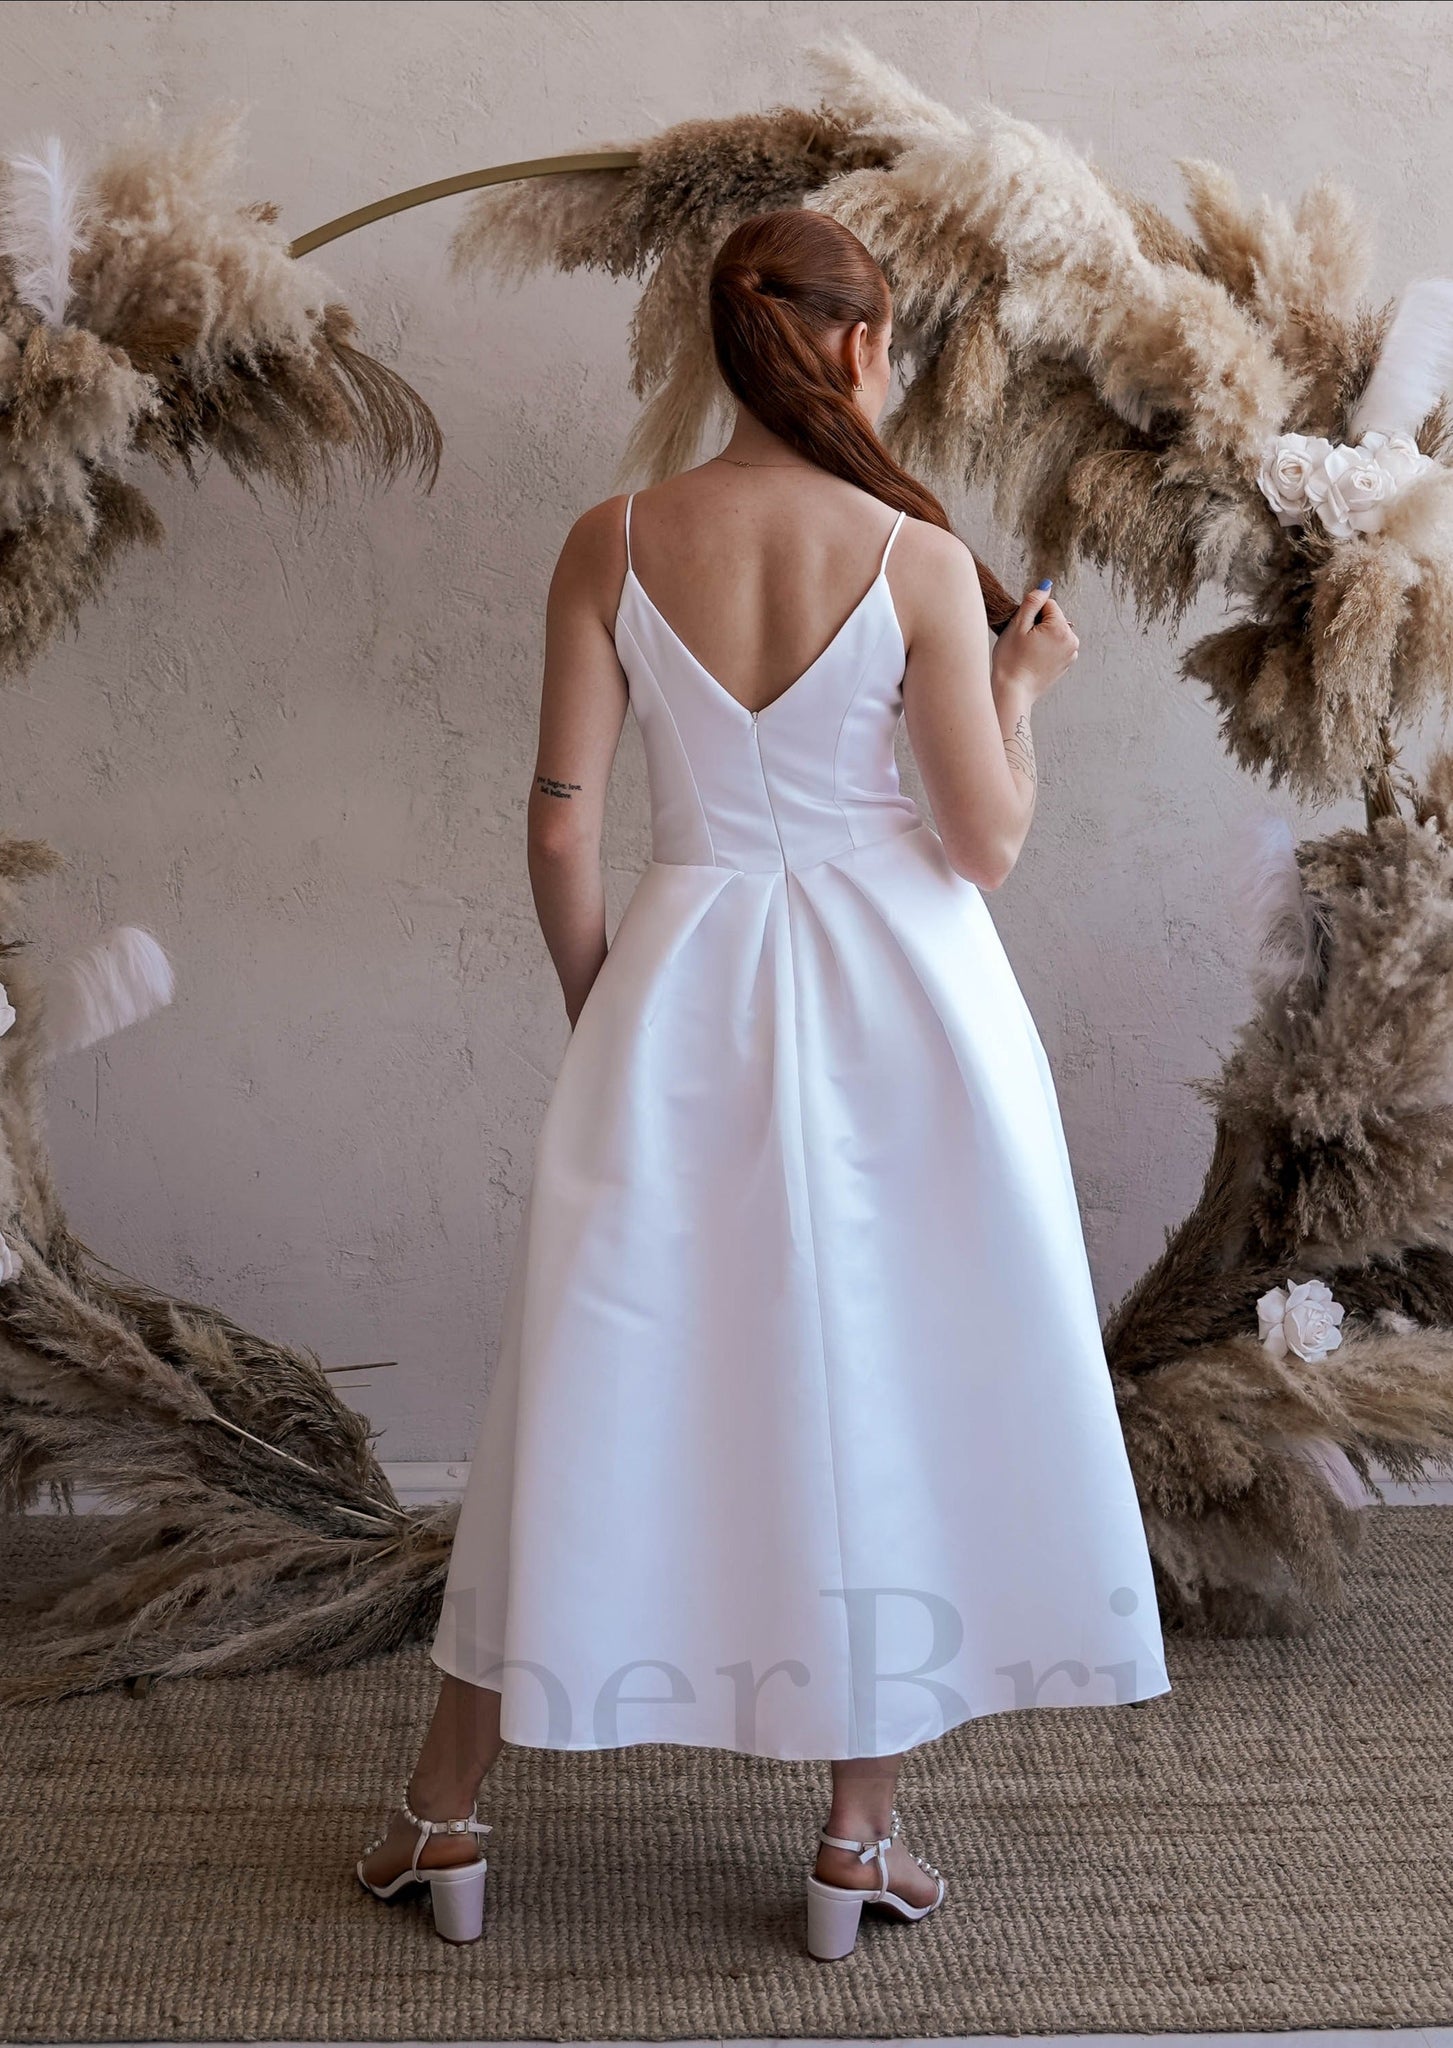 Unique Tea Length Backless Wedding Reception Dress with Spaghetti Straps